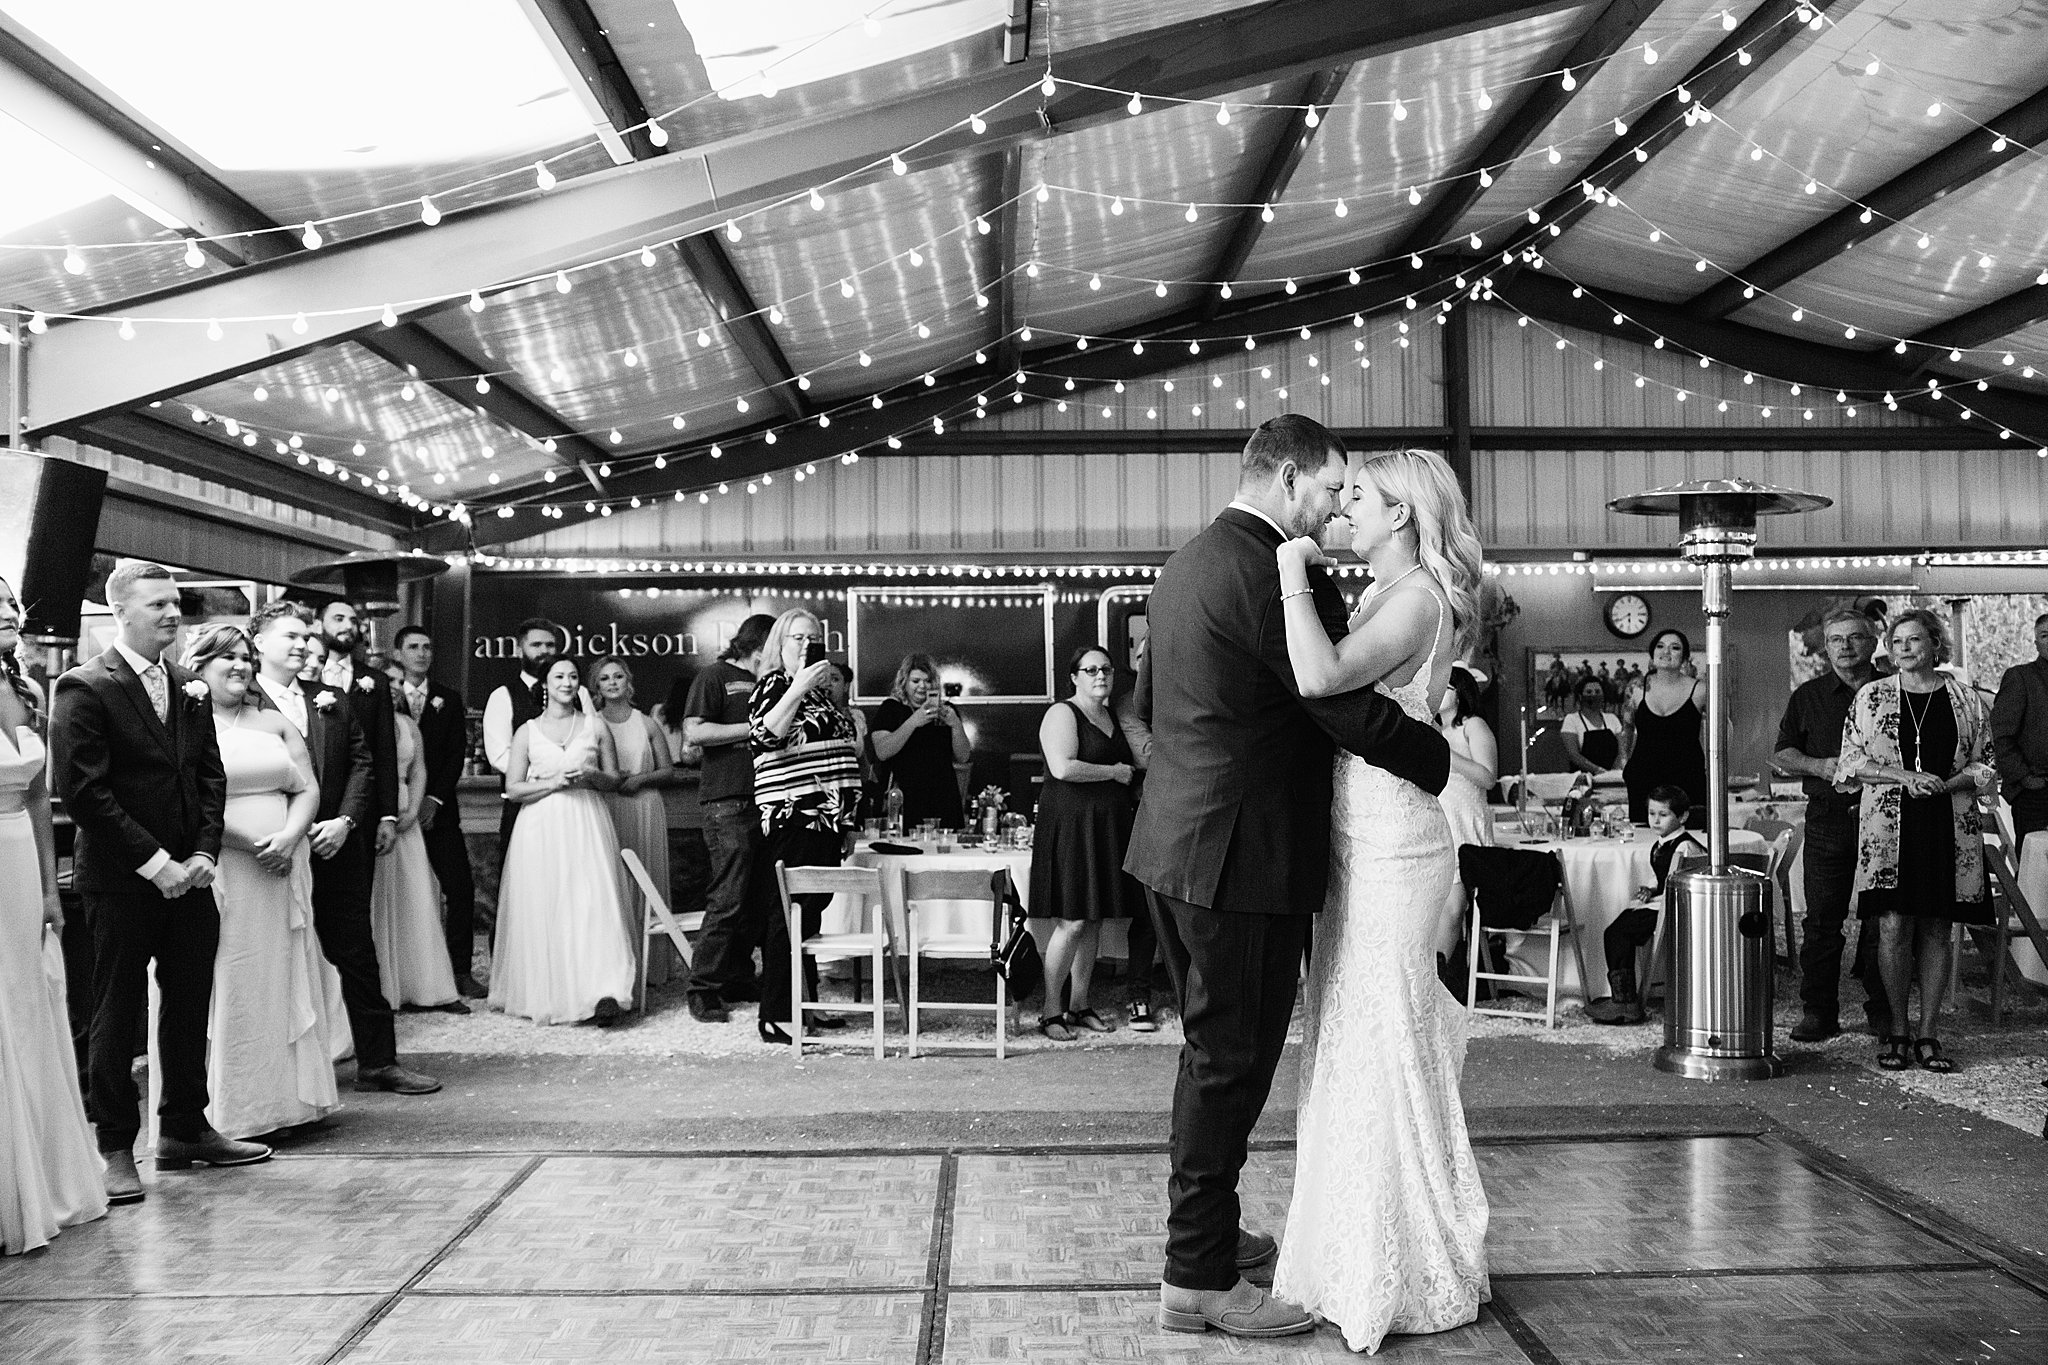 Bride and Groom sharing first dance at their Van Dickson Ranch wedding reception by Arizona wedding photographer PMA Photography.